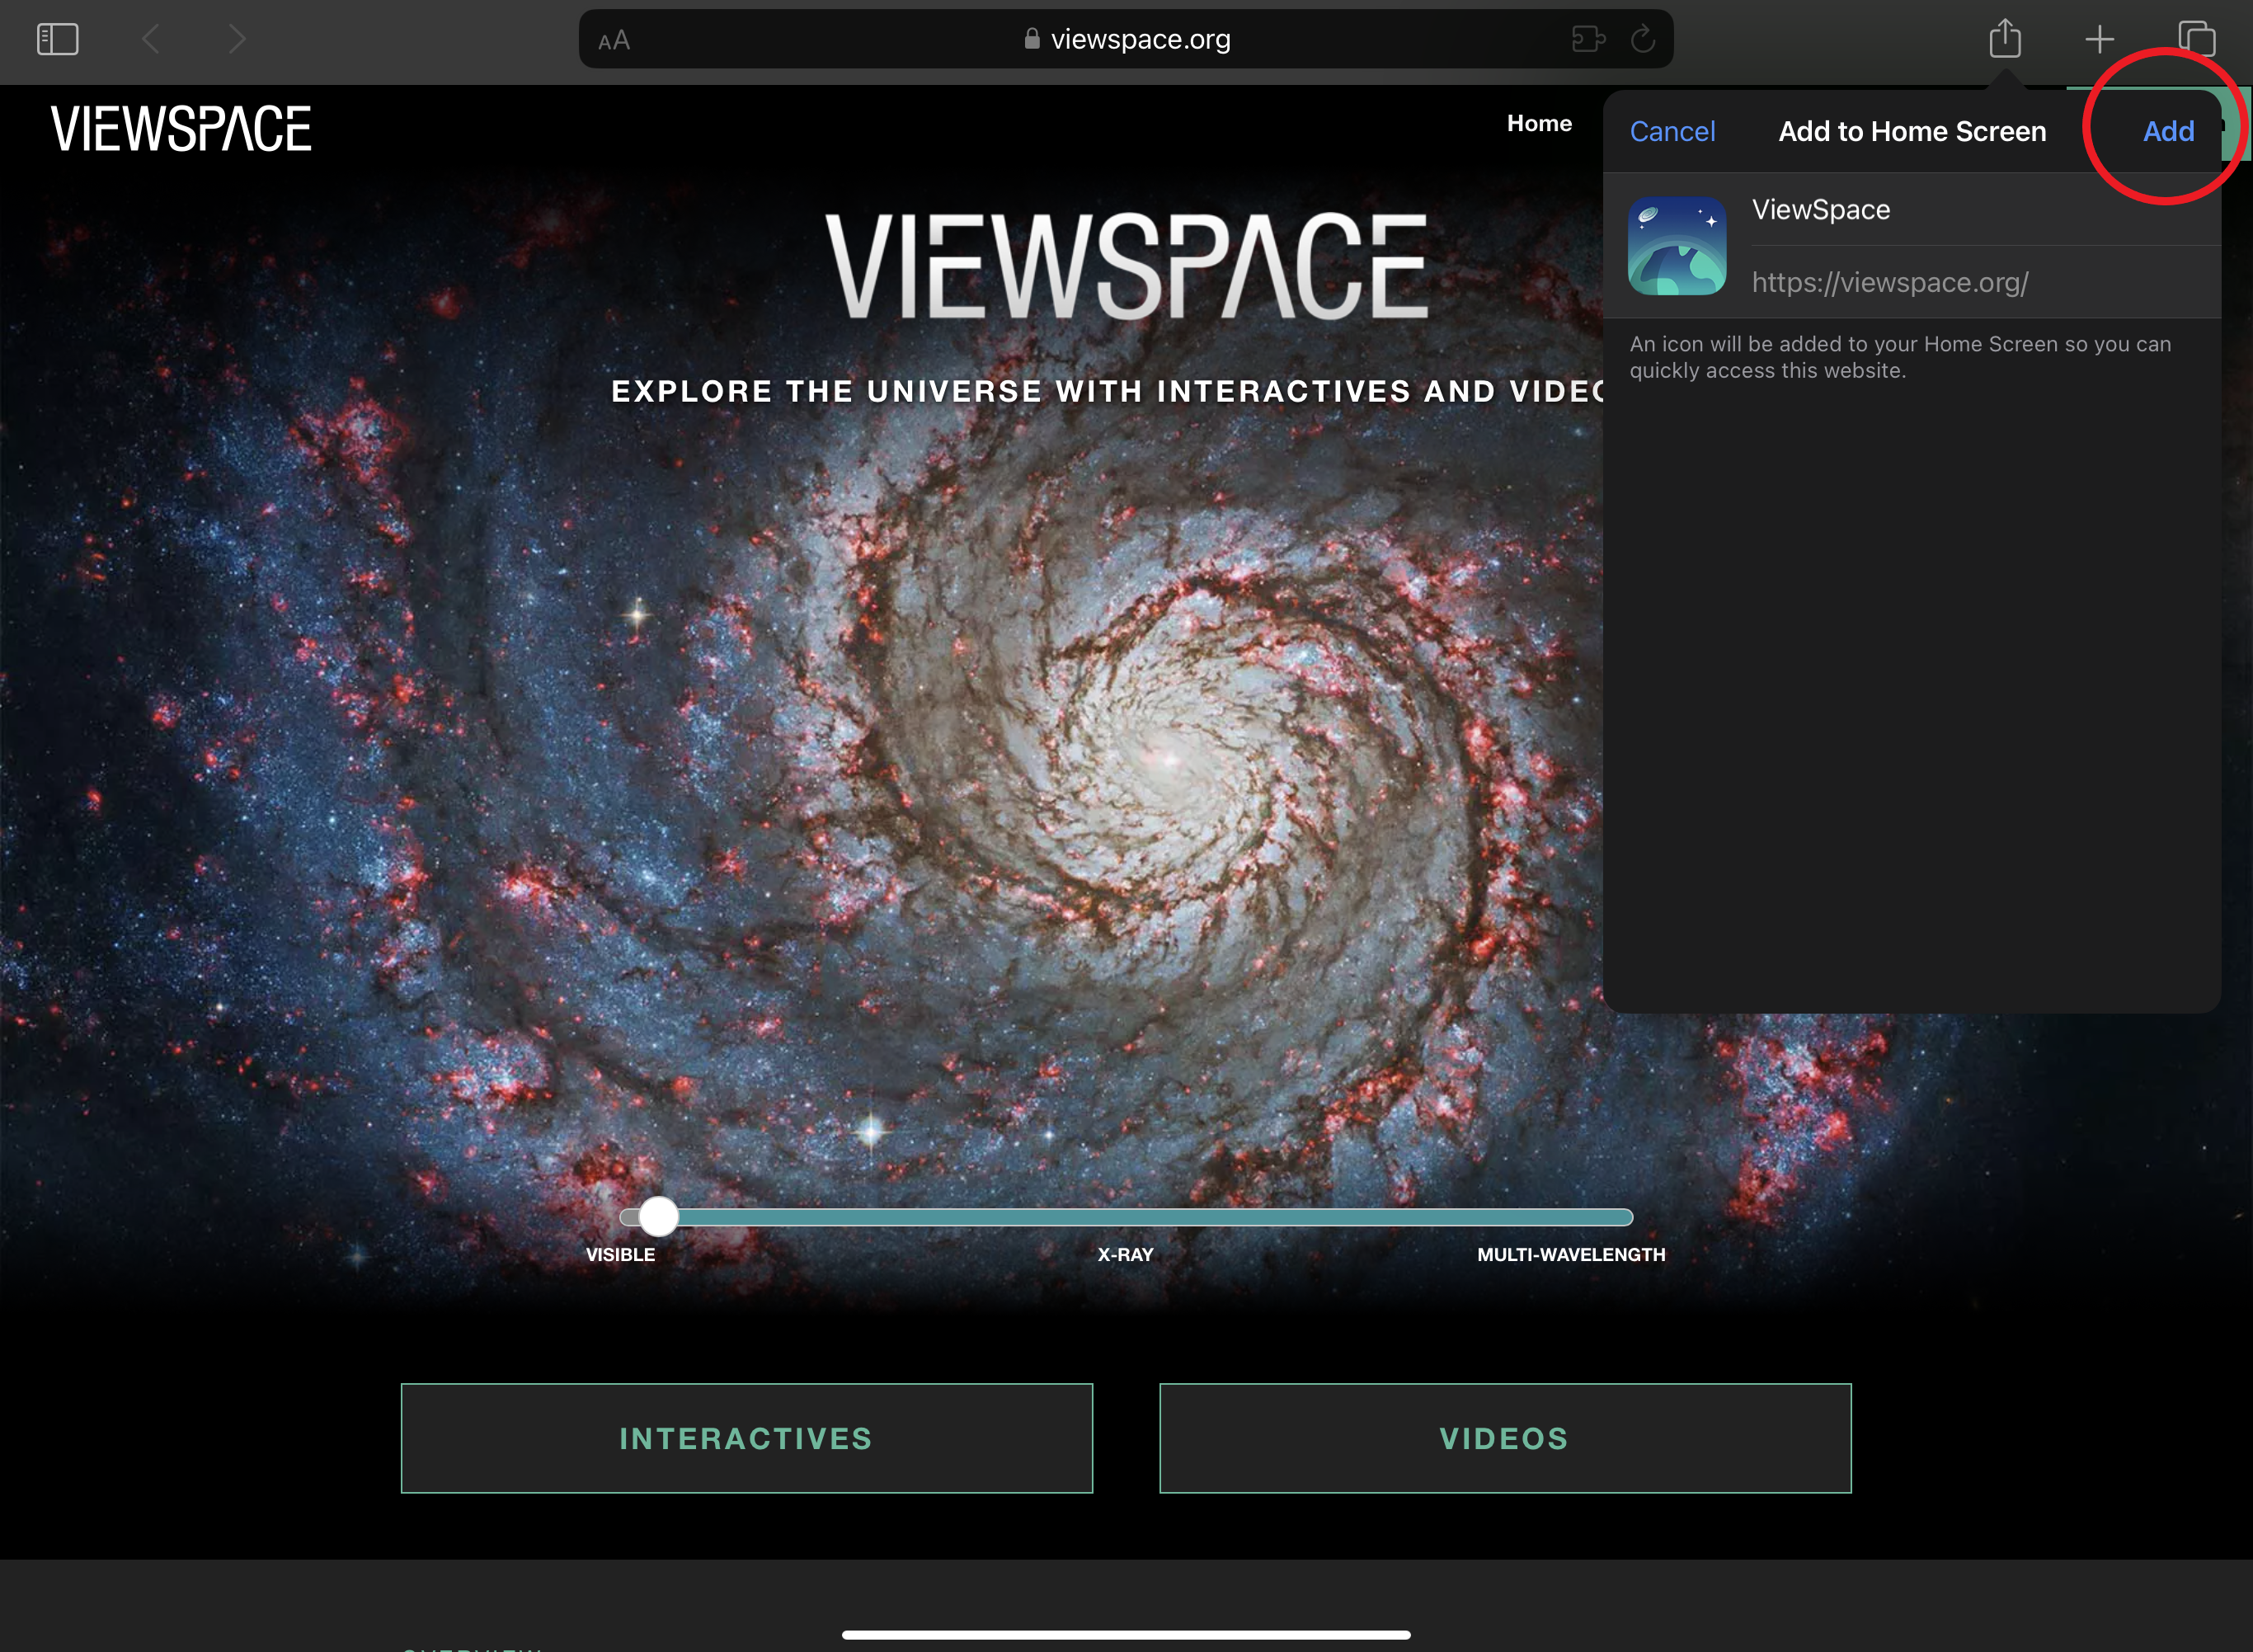 Screenshot of the ViewSpace home screen. In the upper right is the Add the Home Screen menu, with the Add option circled in red.